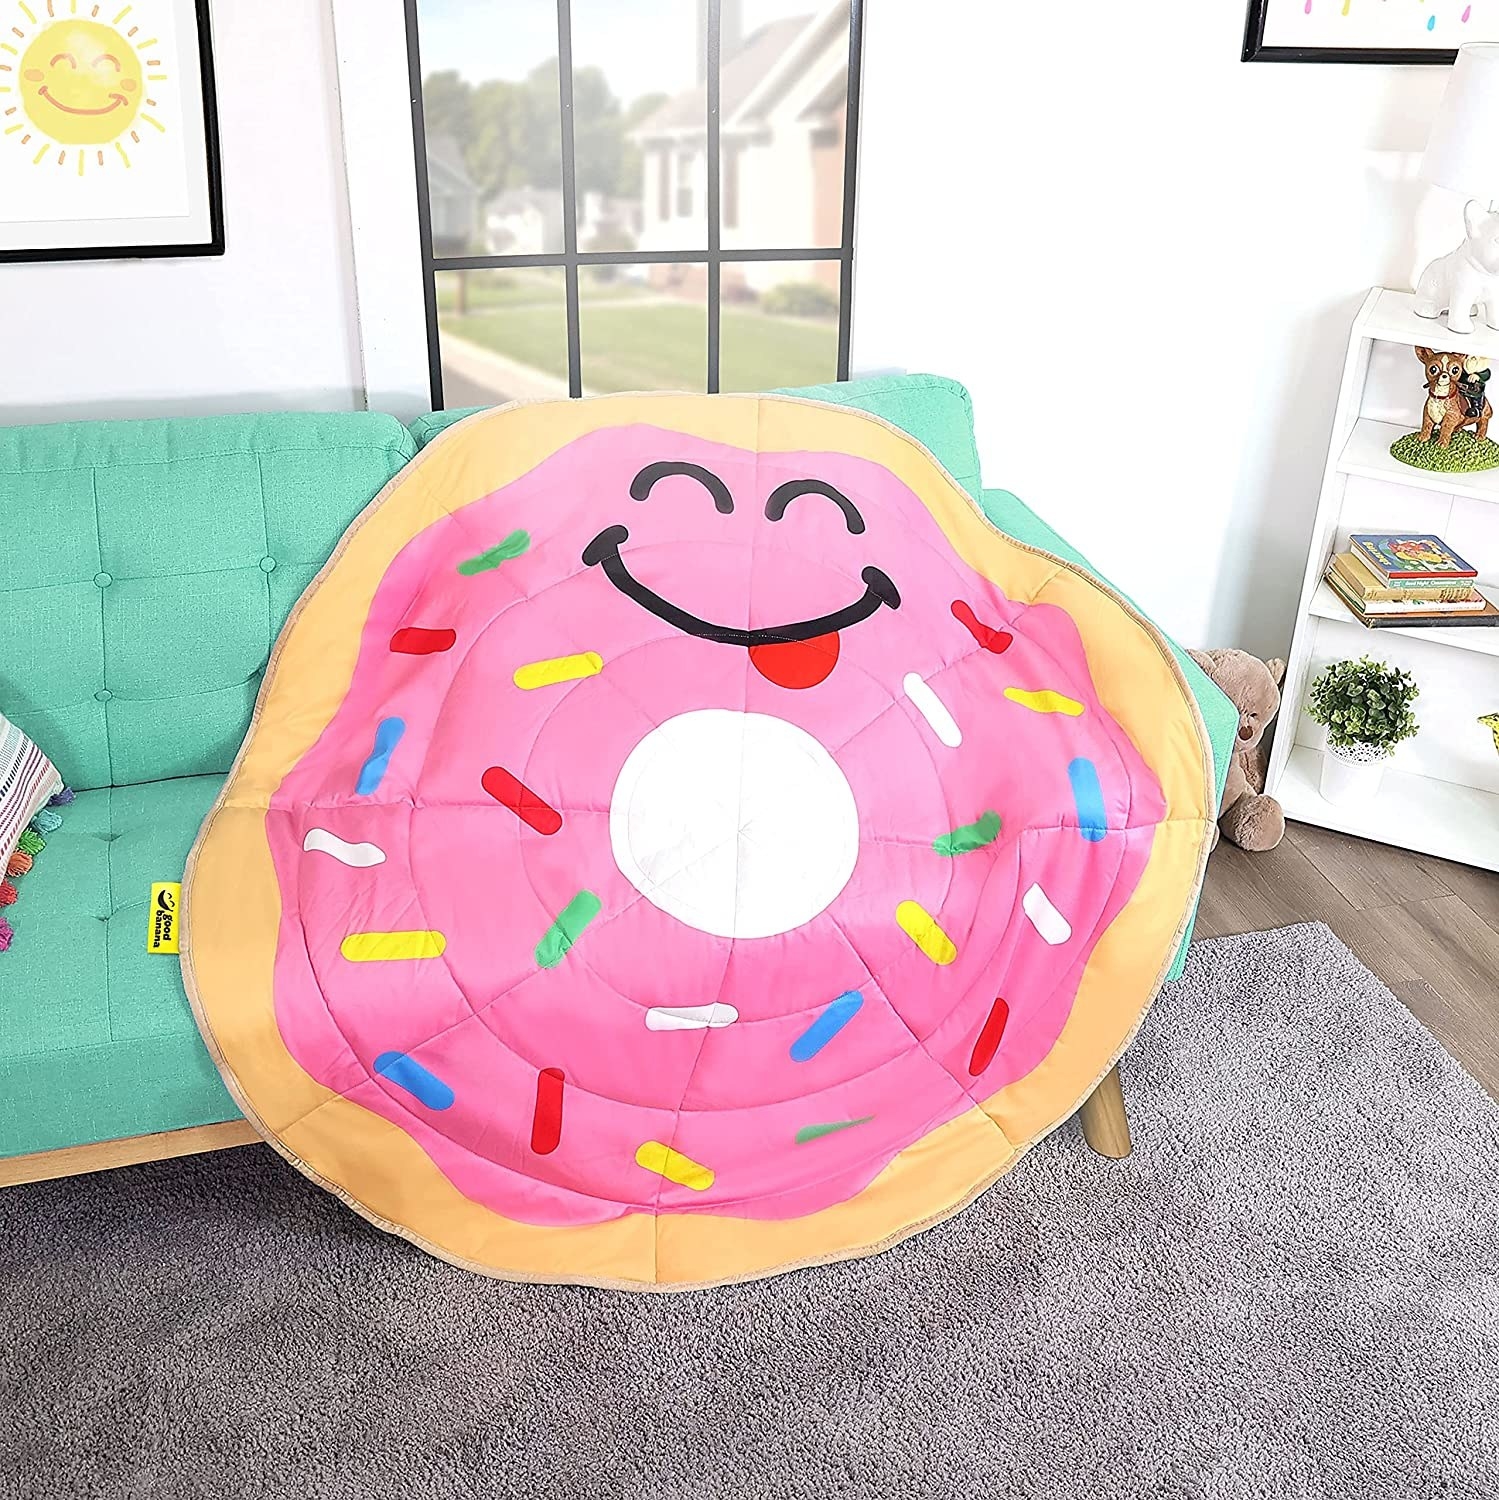 Circular blanket that looks like a pink frosted donut with sprinkles